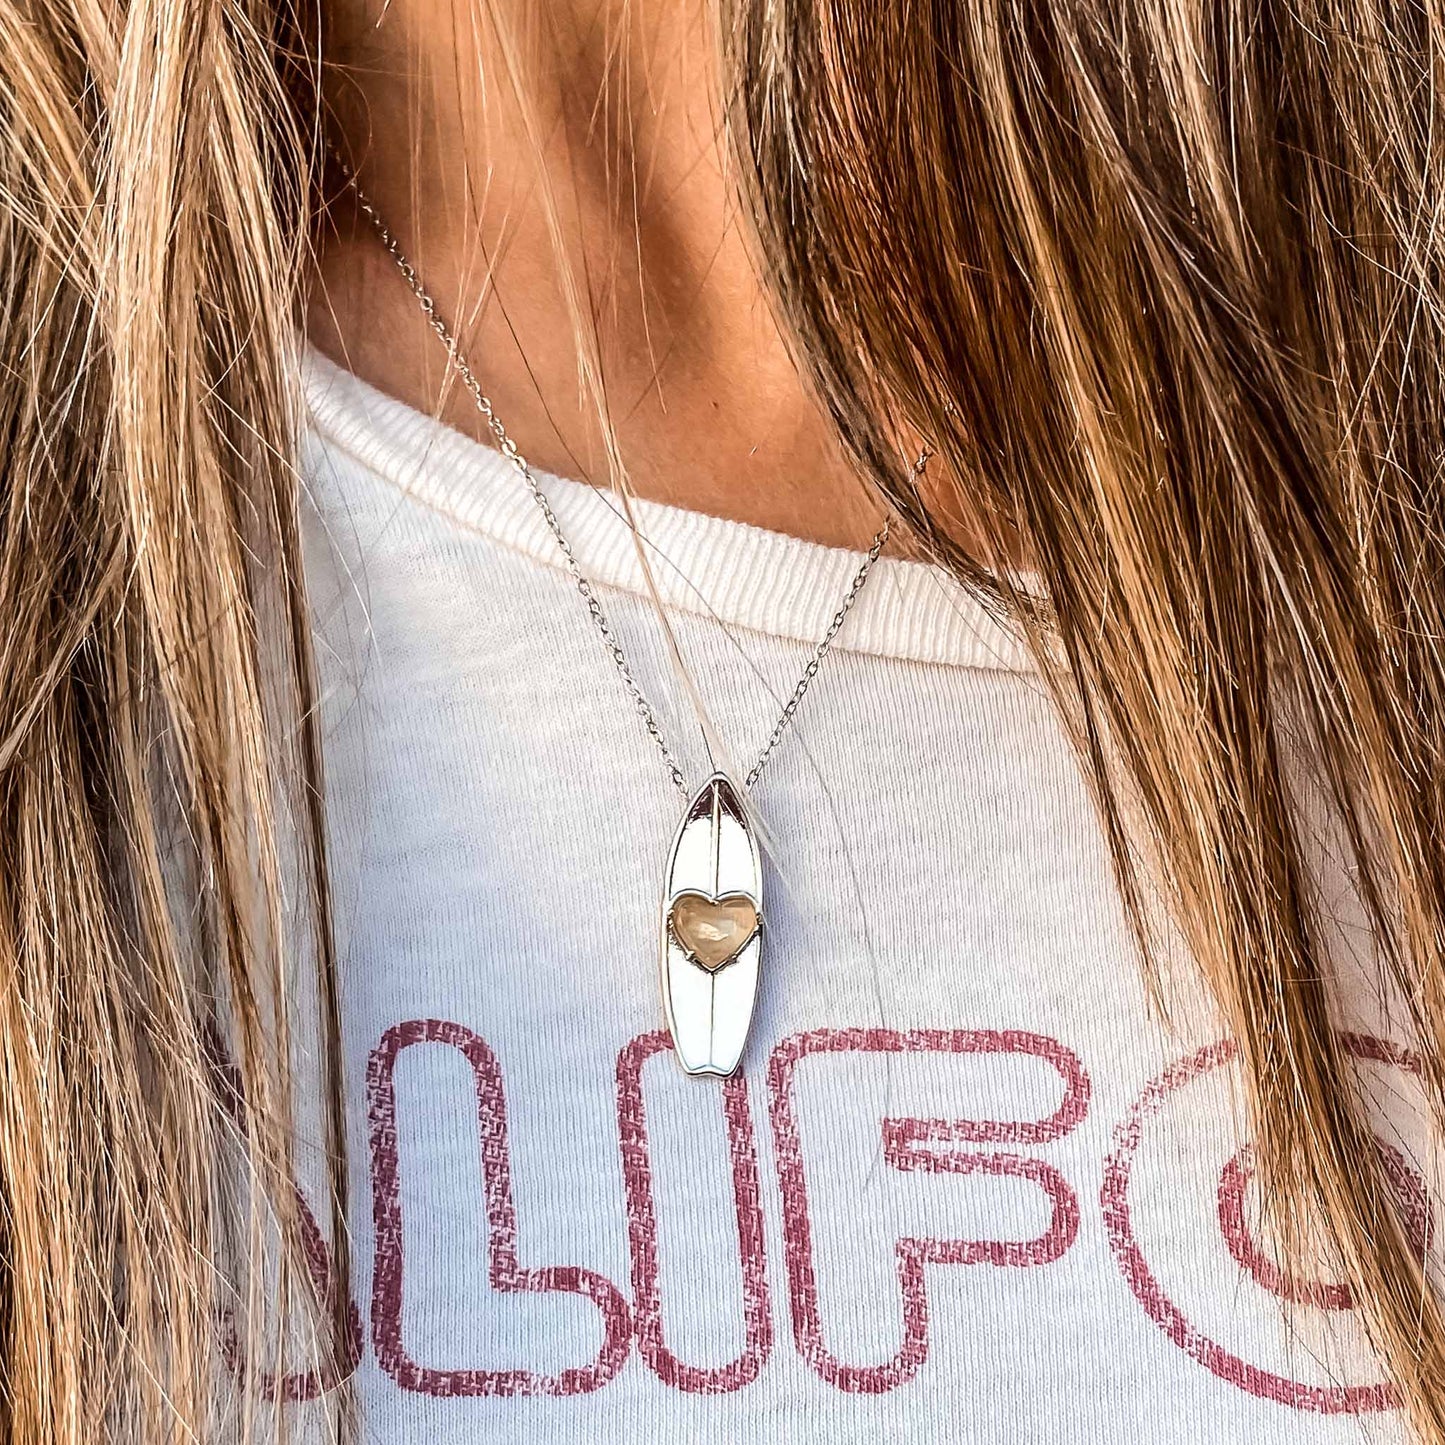 What's the surf forecast for today? While Surfline helps with the swell, wind & wave forecasts we help you show off your passion for surfing. Whether you're surfing or just checking the waves at Pipeline, take your surfboard, always. Shop the November birthstone surf jewelry online or at a surf shop near you.